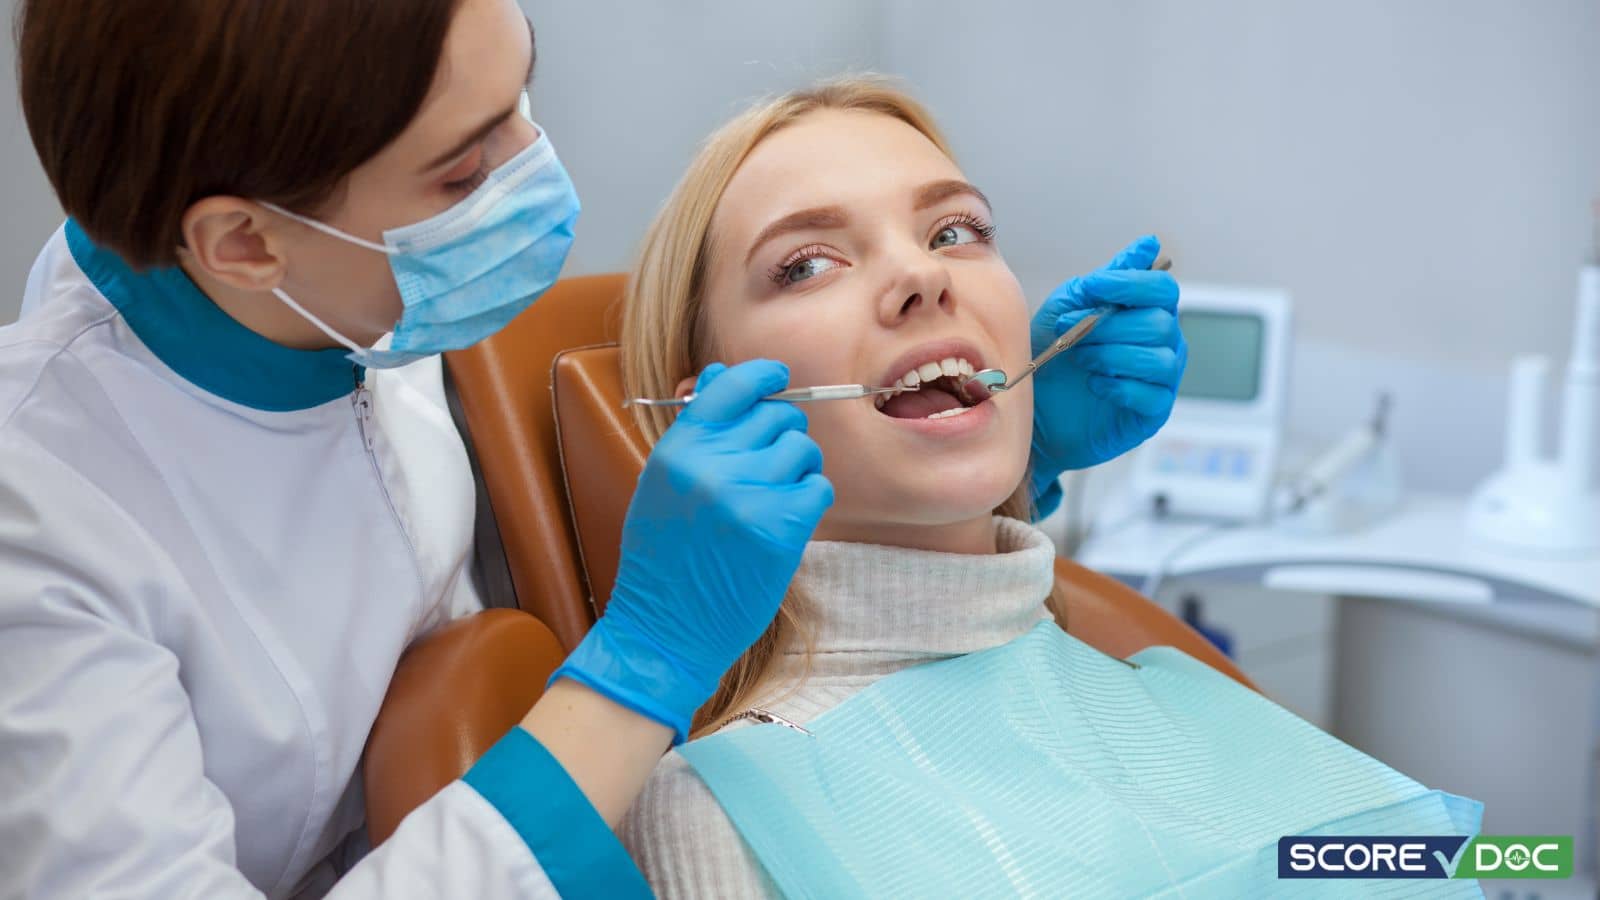 Top-Rated Dental Care Centers in Scottsdale, AZ